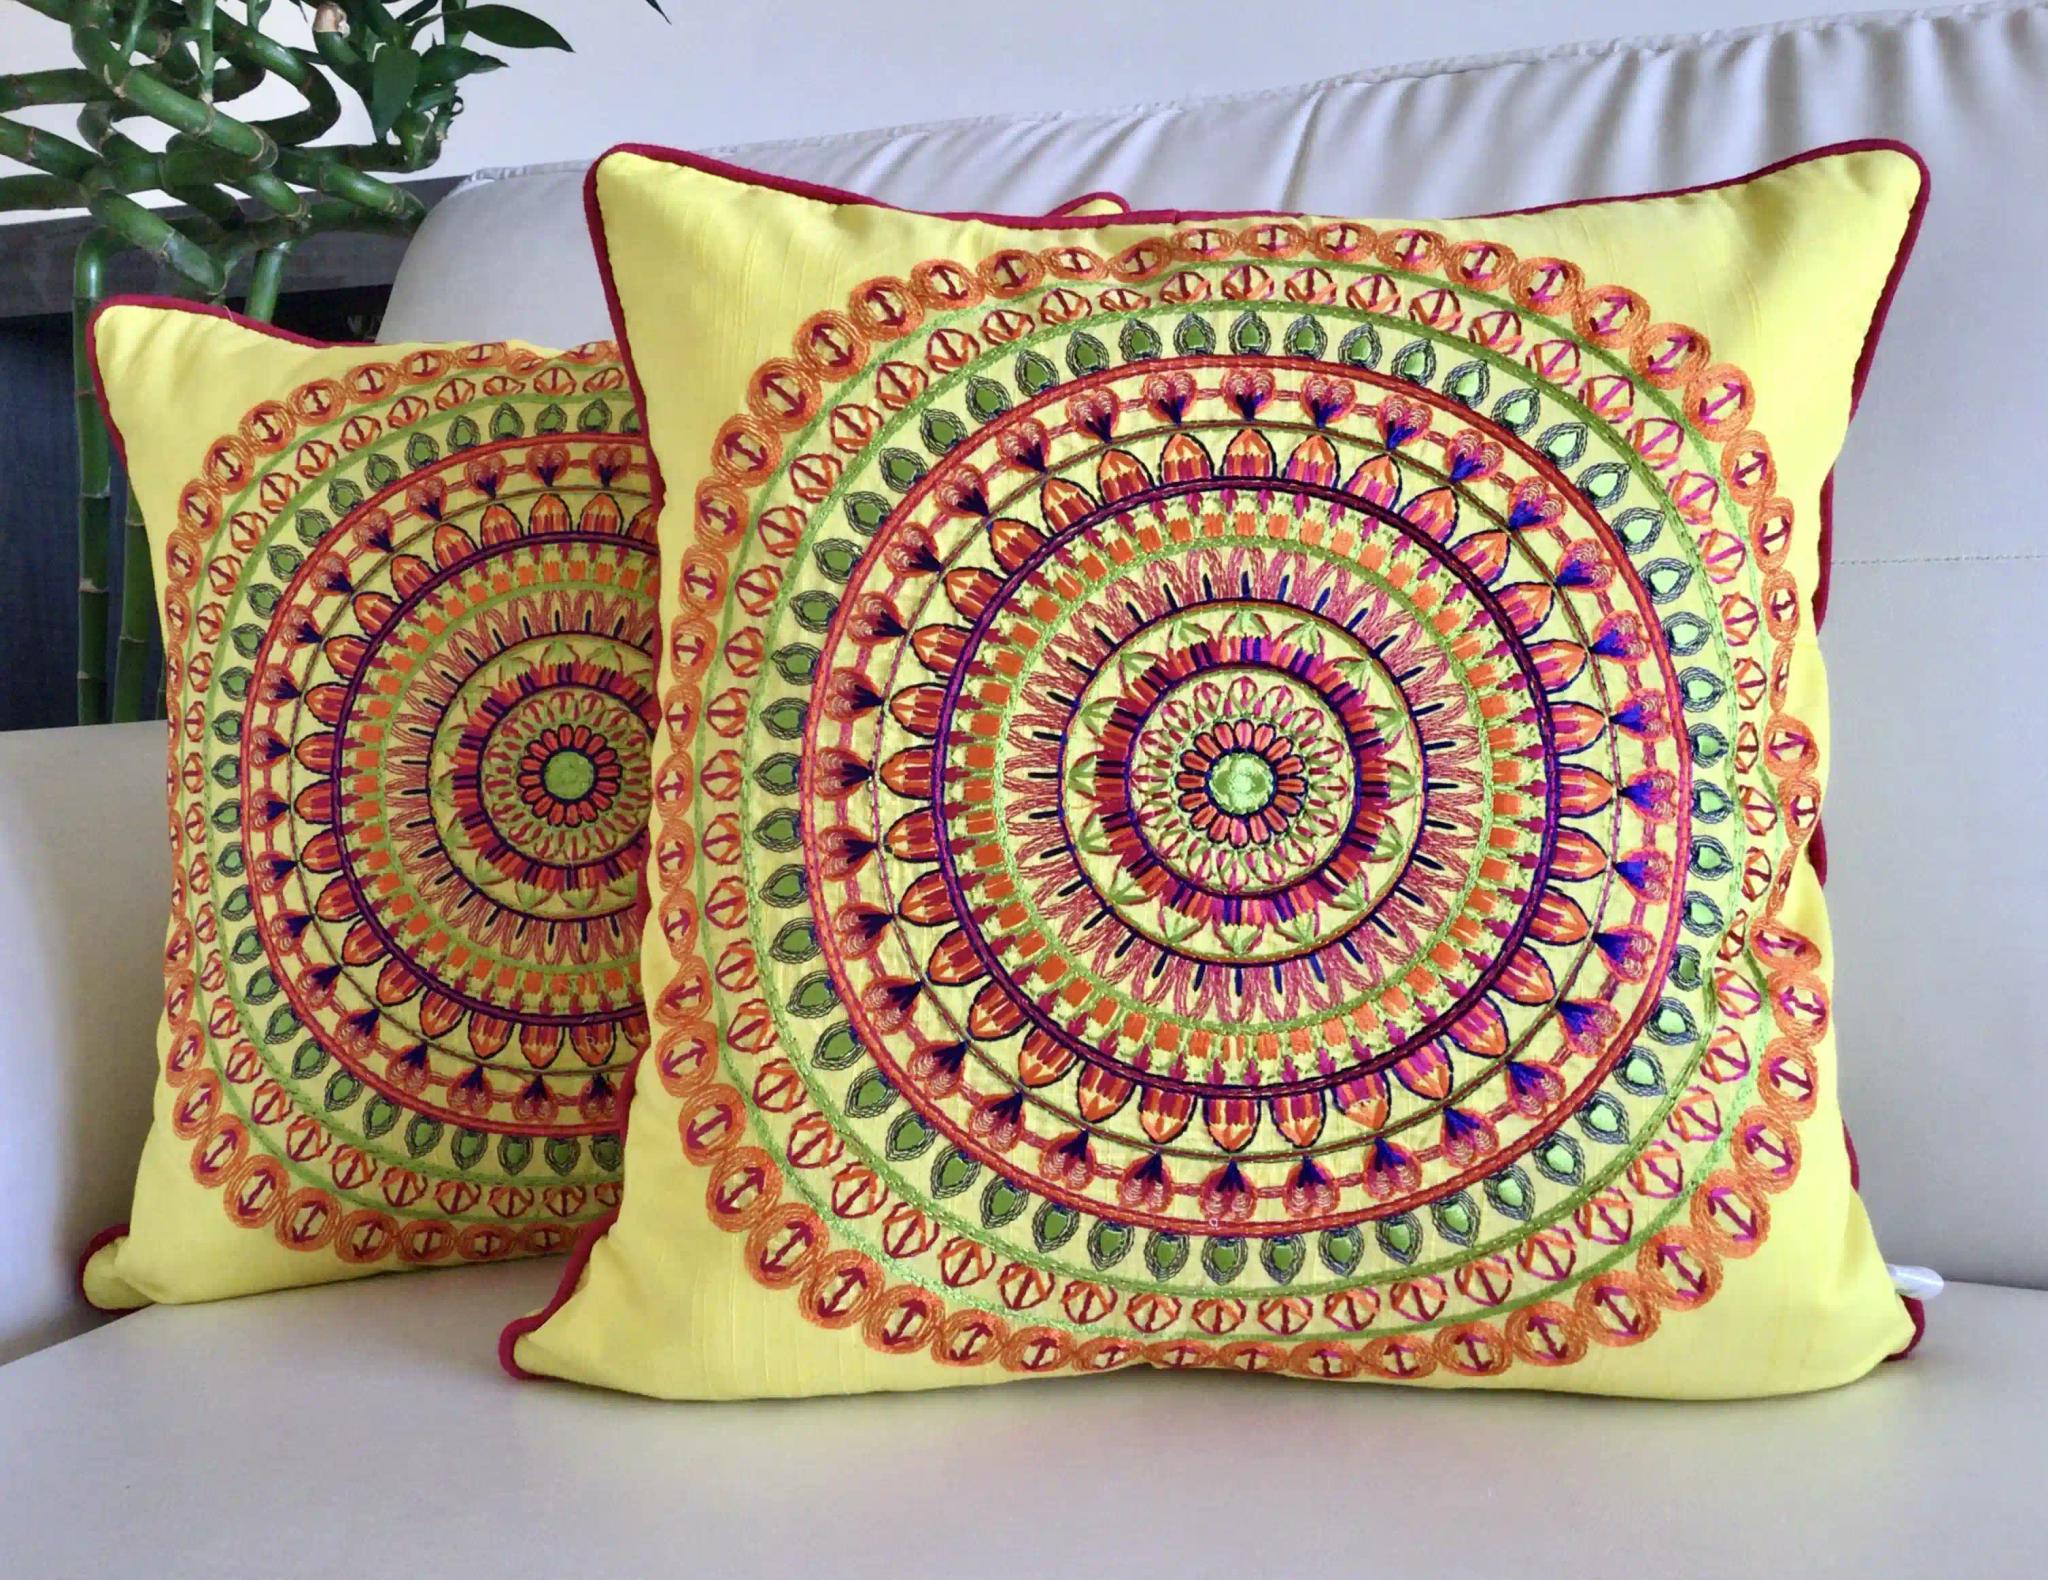 Colors of India- Embroidered Cotton Silk Cushion Cover- Limoncello Yellow- Set of 2